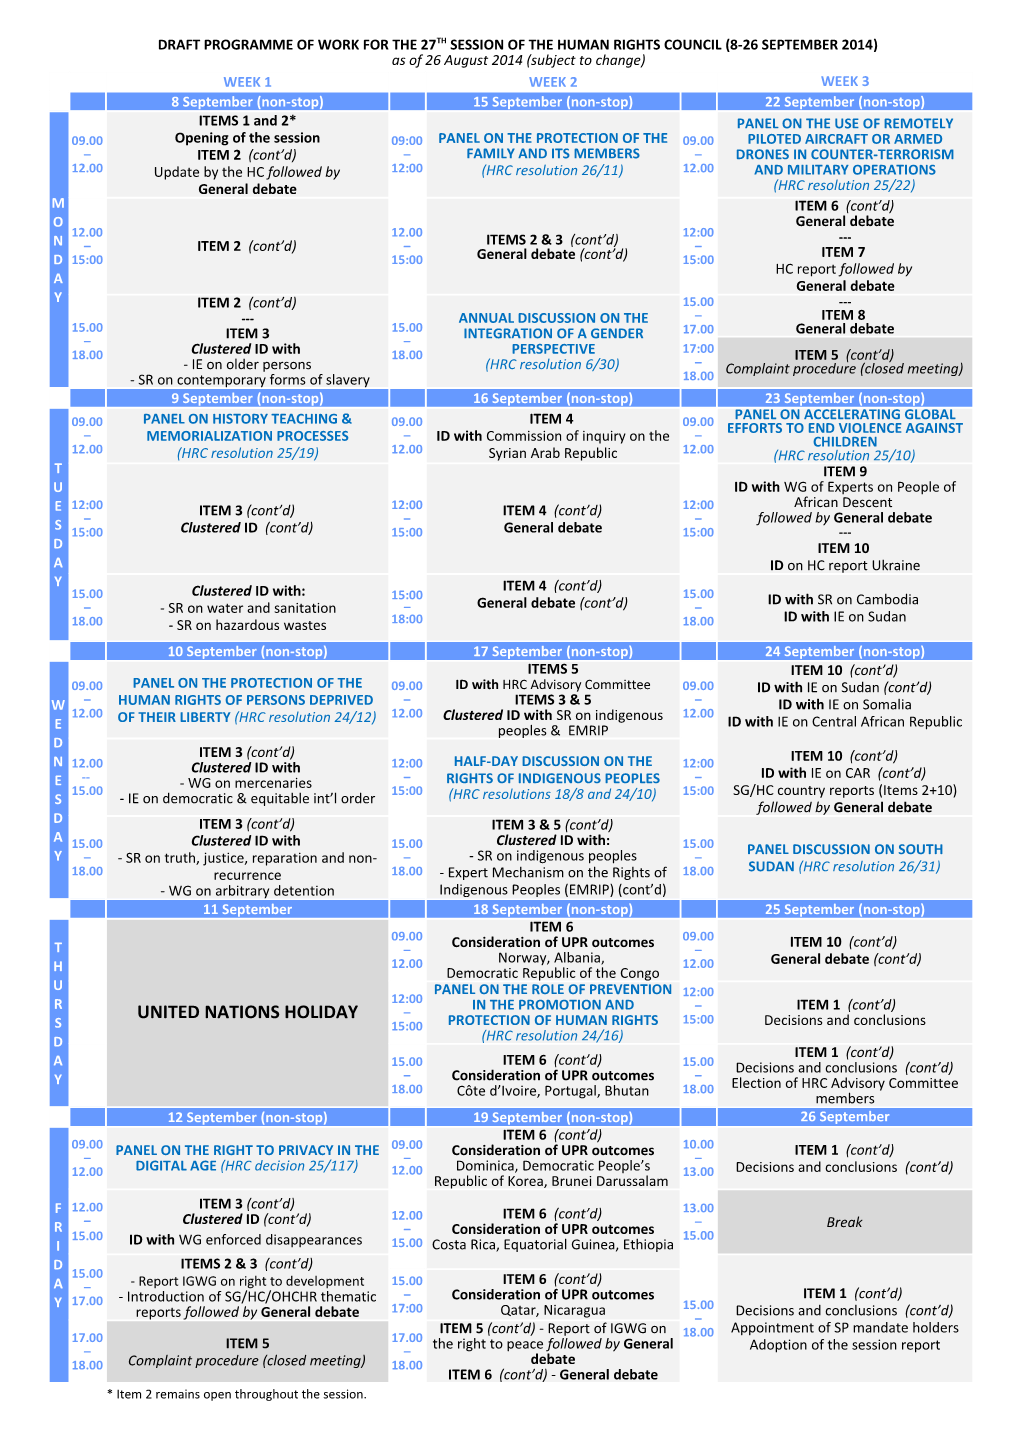 Programme of Work for the 27Th Session of the Human Rights Council in English